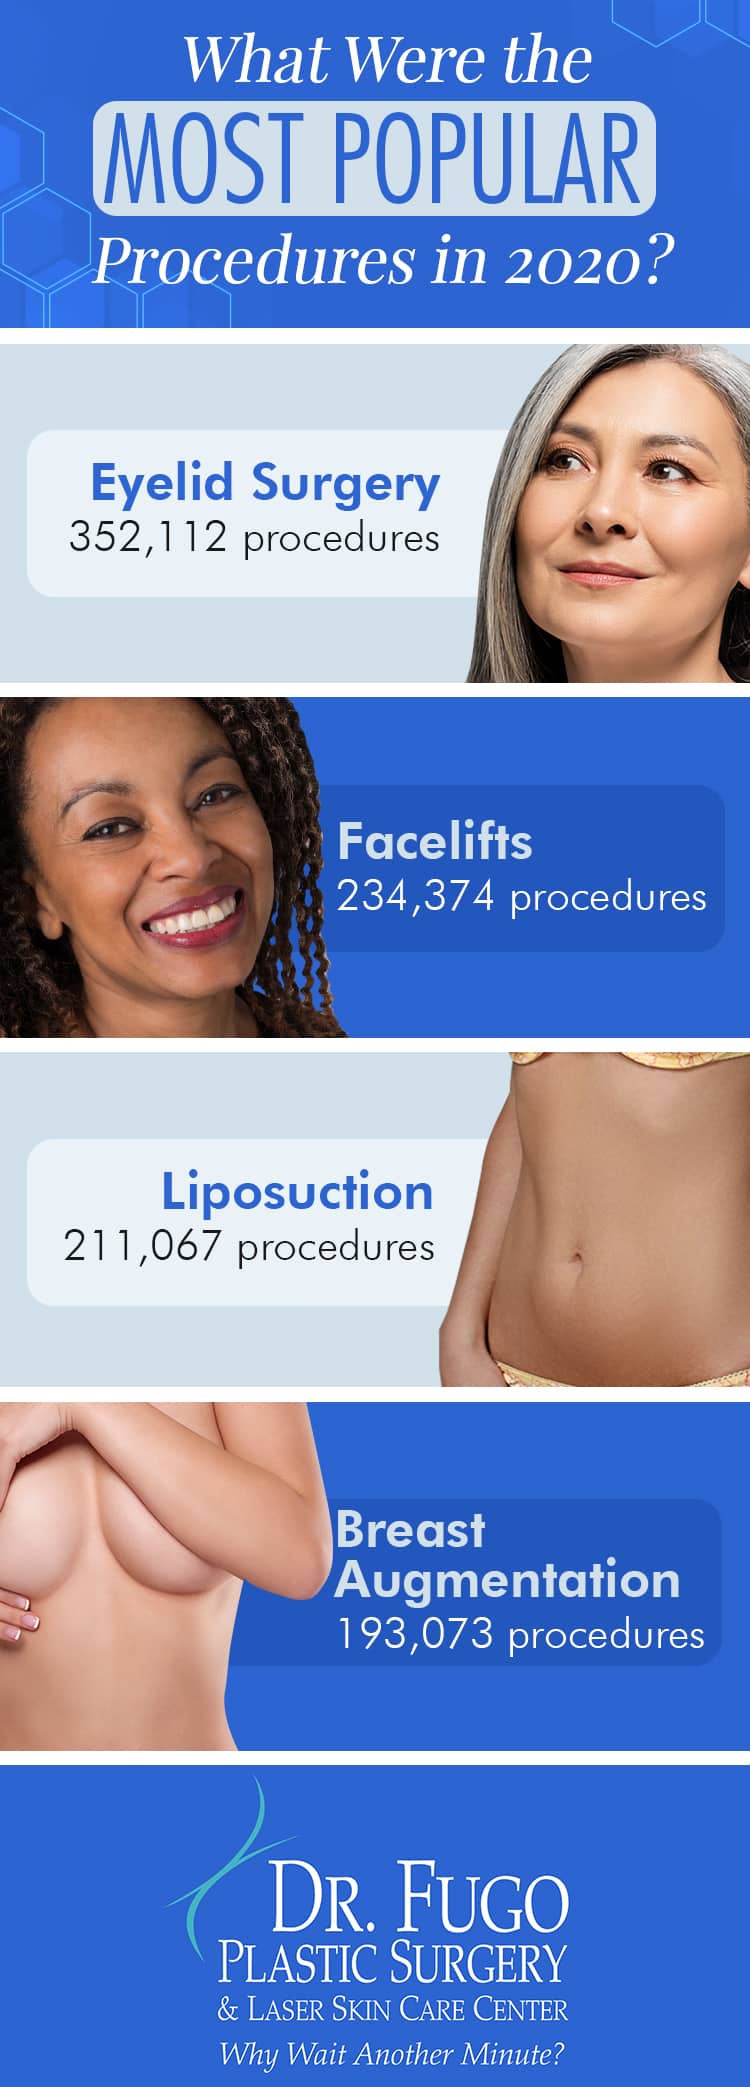 An infographic showing the most popular procedures in 2020